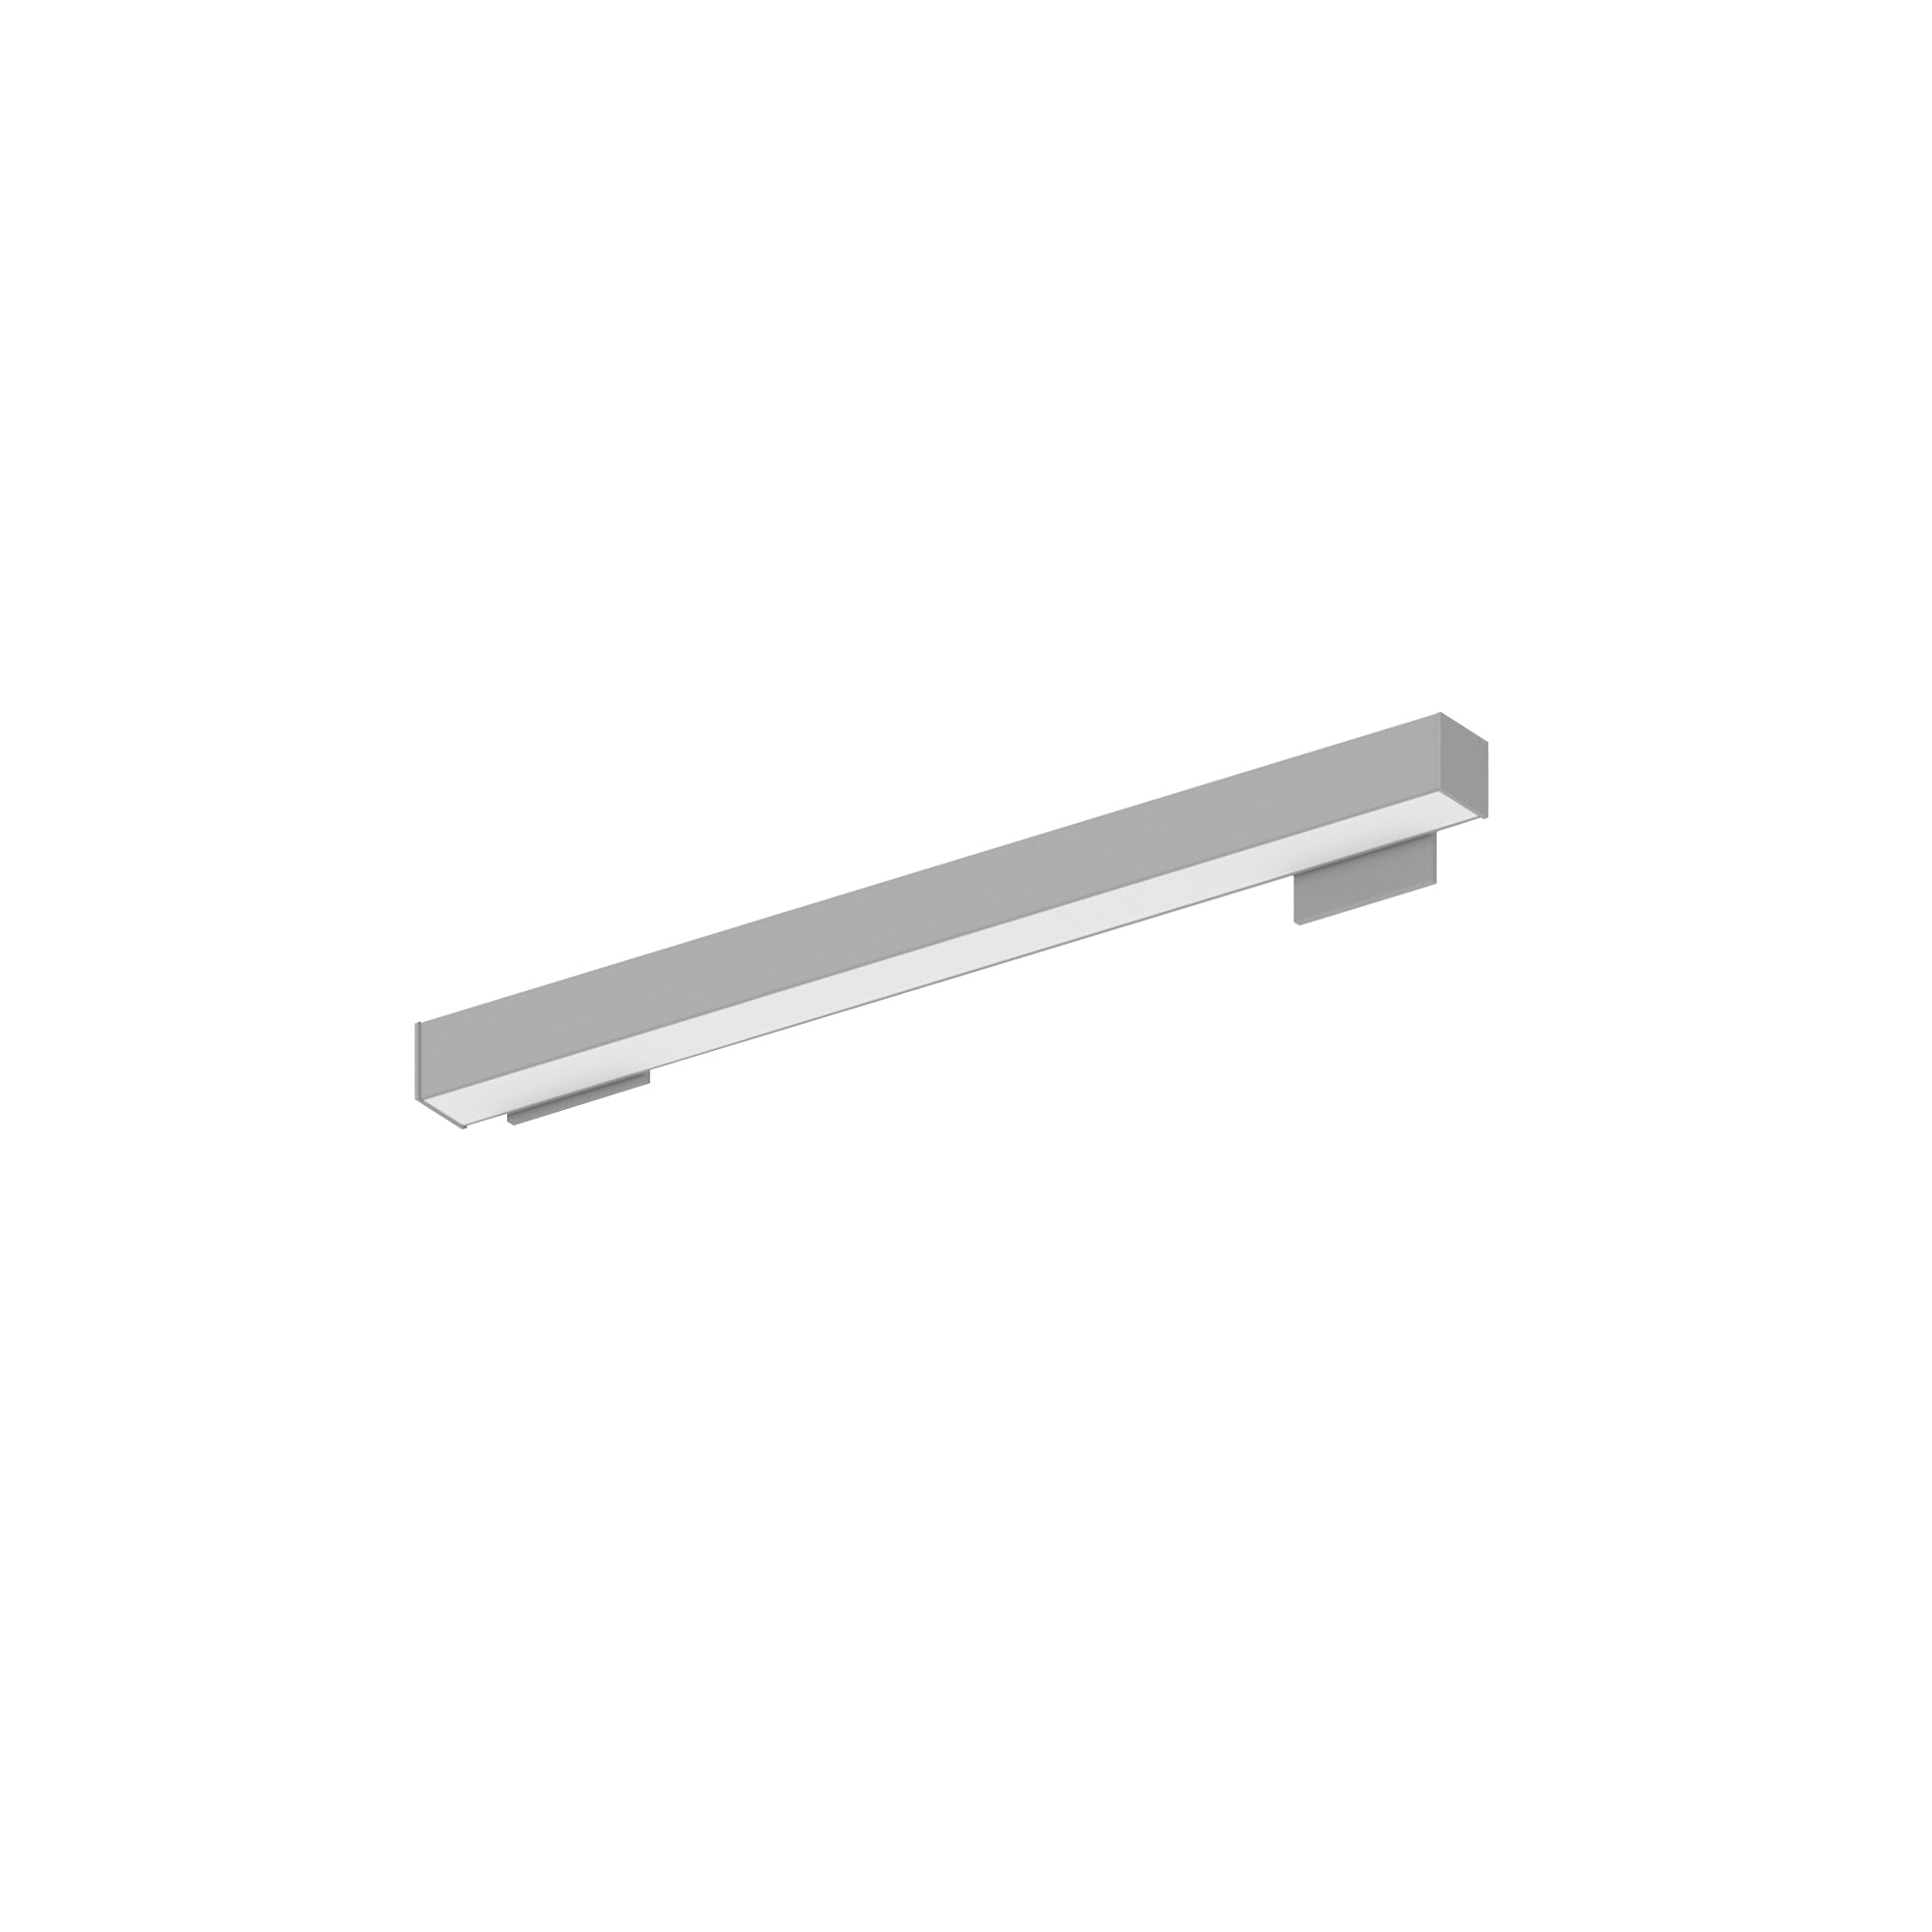 Nora Lighting NWLIN-21035A/L2-R4P - Linear - 2' L-Line LED Wall Mount Linear, 2100lm / 3500K, 2 Inchx4 Inch Left Plate & 4 Inchx4 Inch Right Plate, Right Power Feed, Aluminum Finish